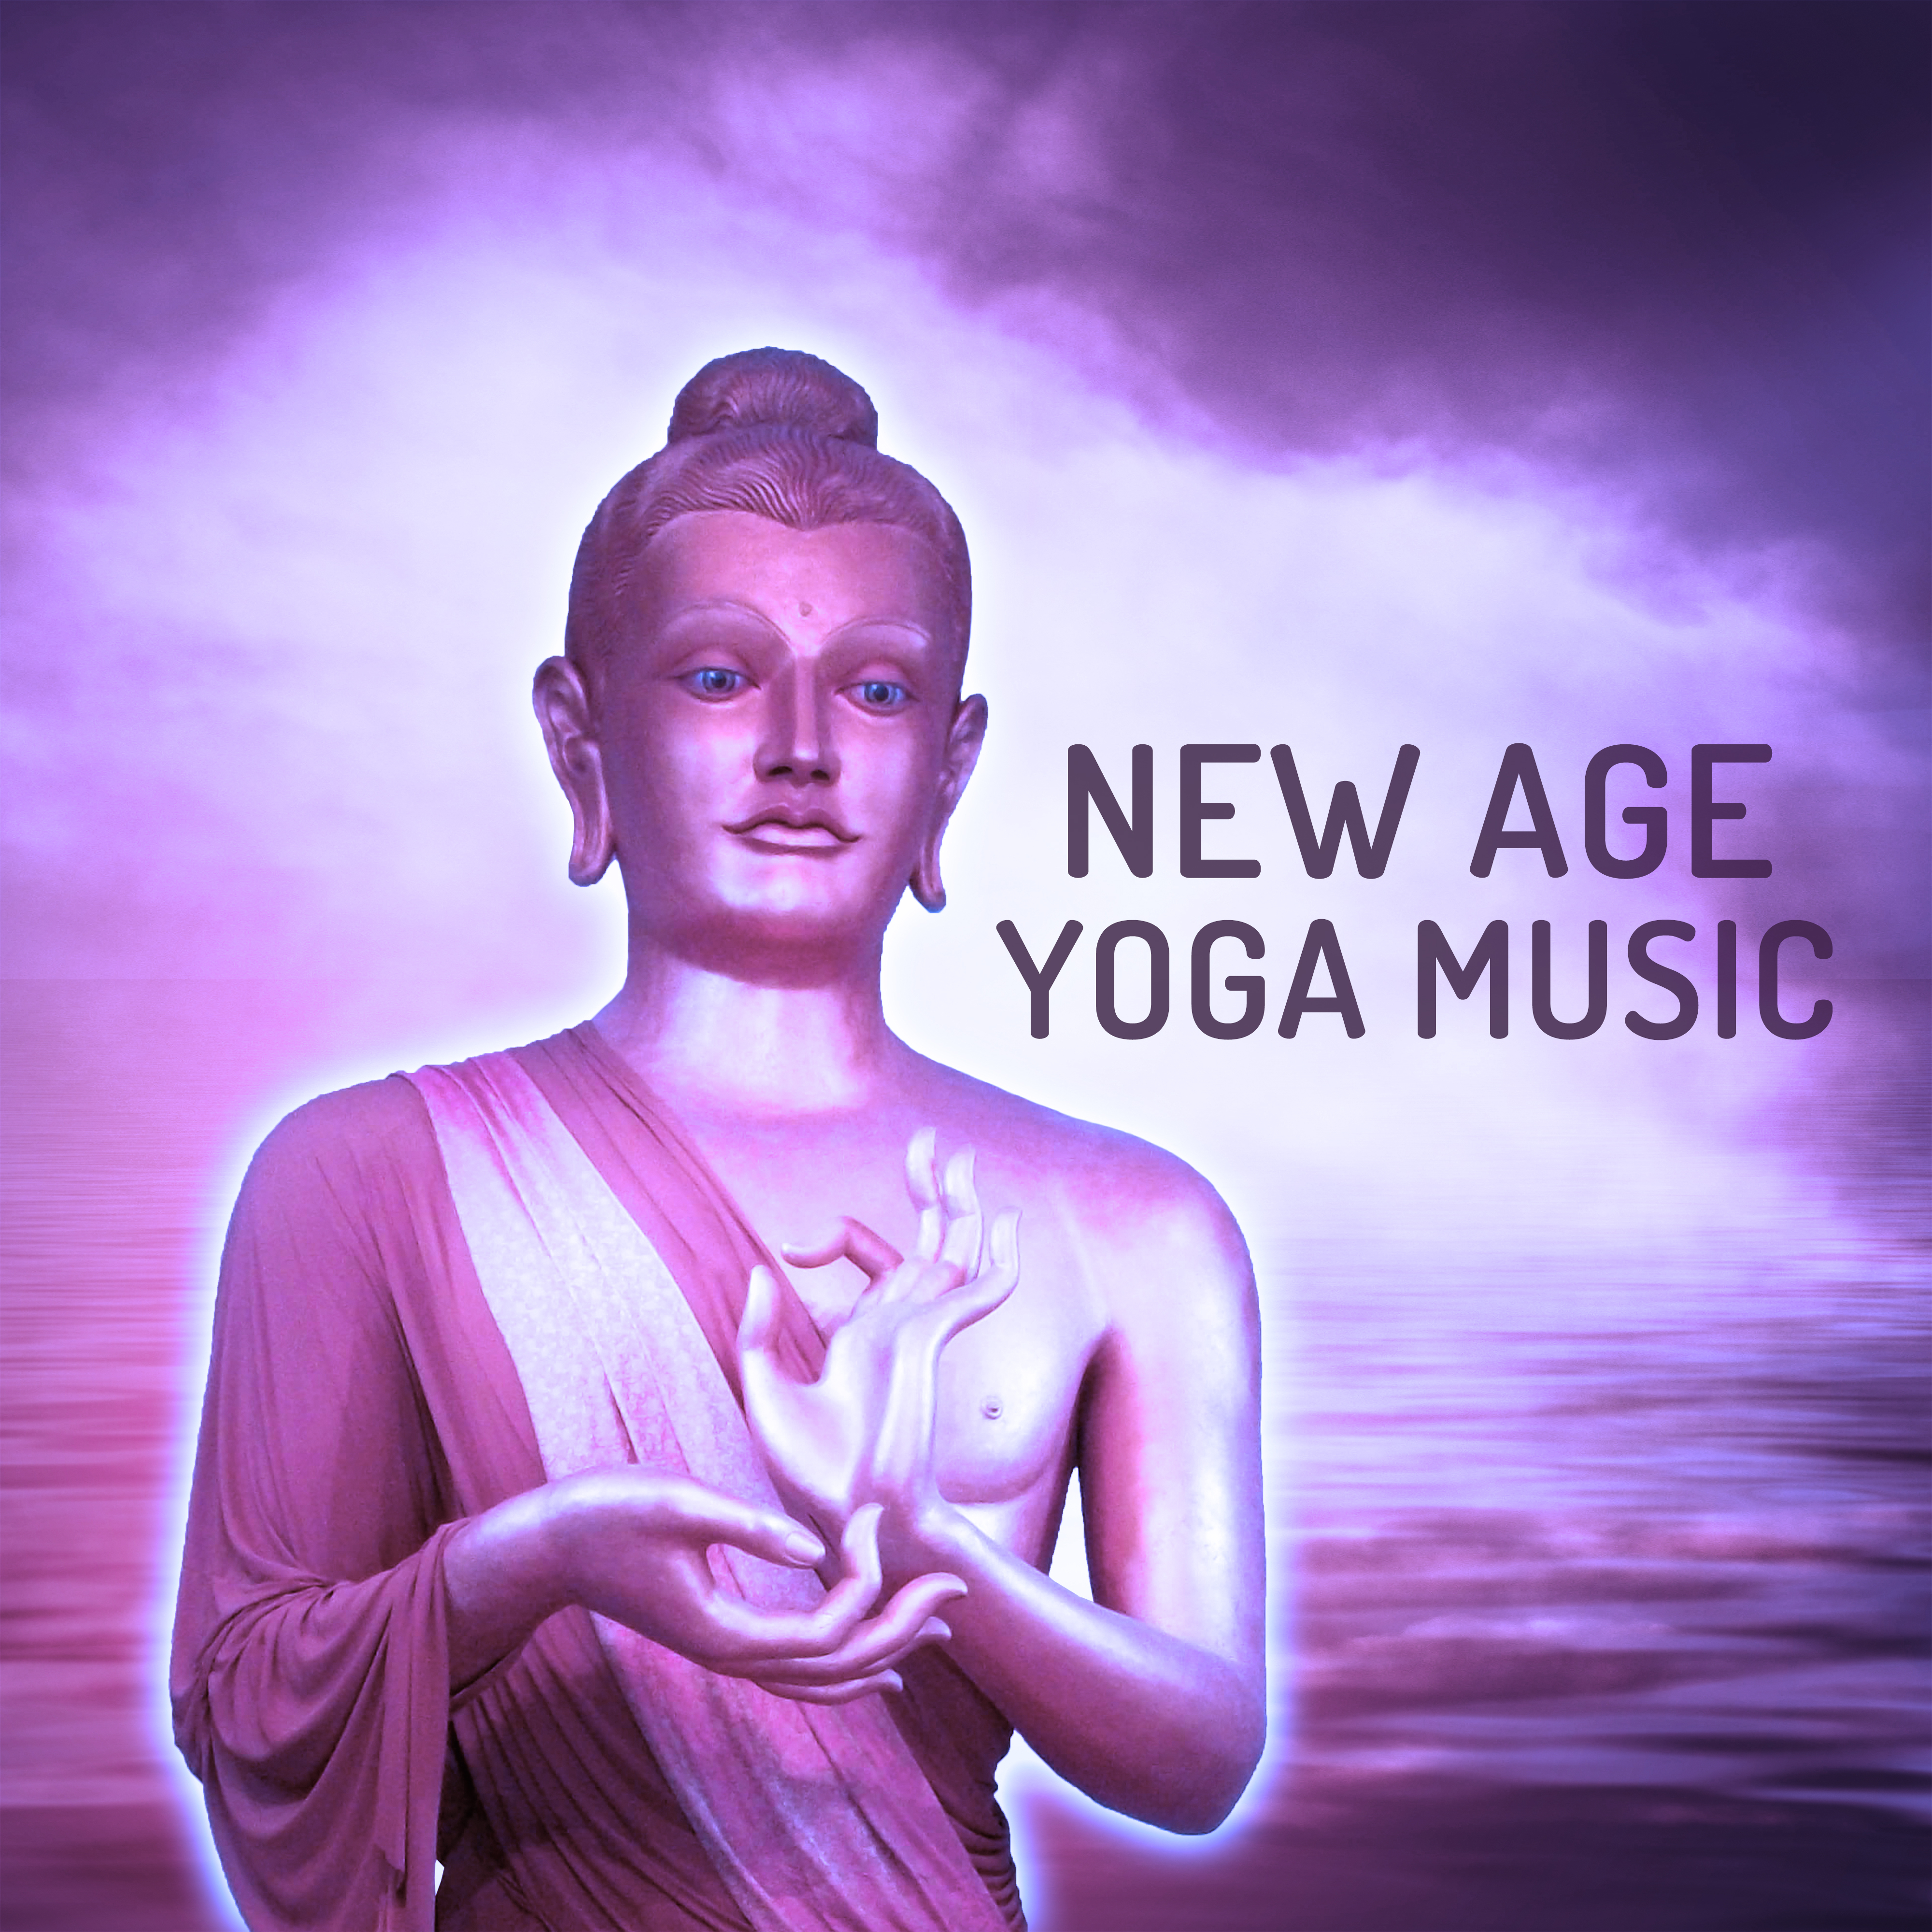 New Age Yoga Music  Soft Sounds for Relaxation, Soothing Waves, Meditation Sounds, Yoga Training